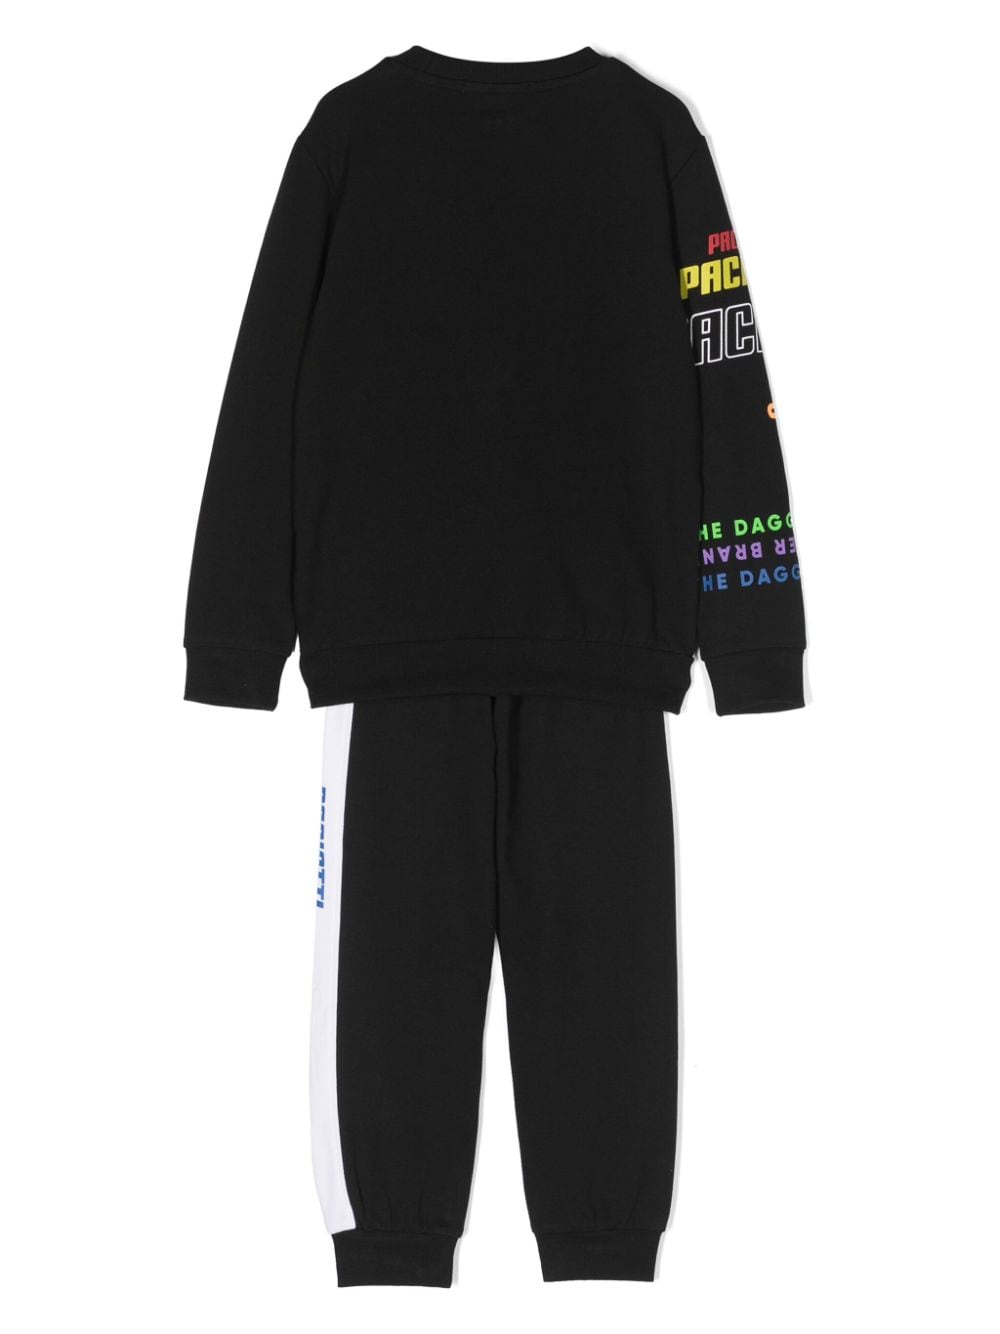 Black sports suit for boys with logo